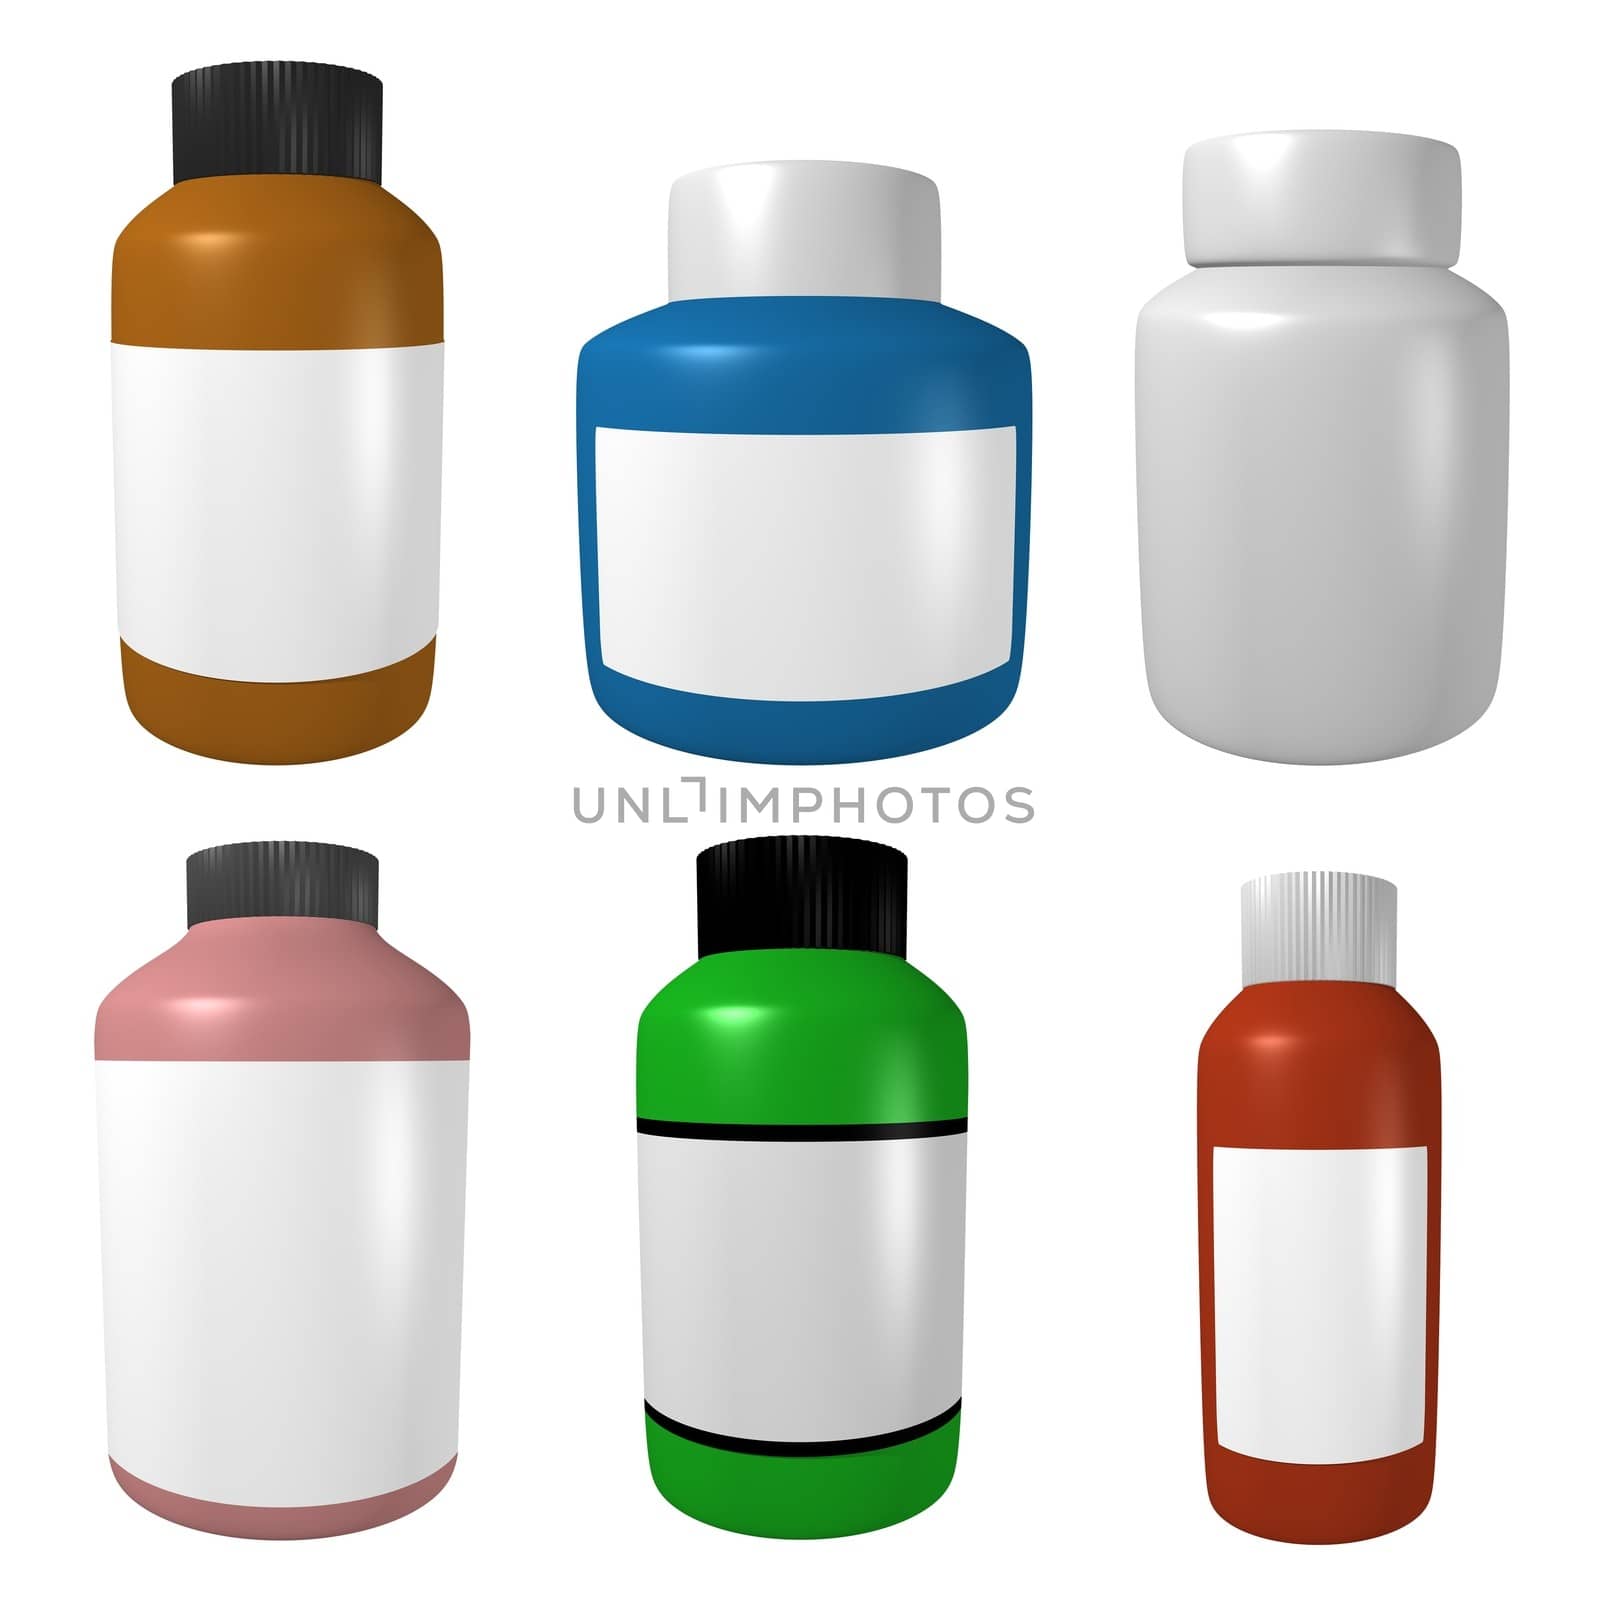 Illustration of six containers for medicine or other purposes